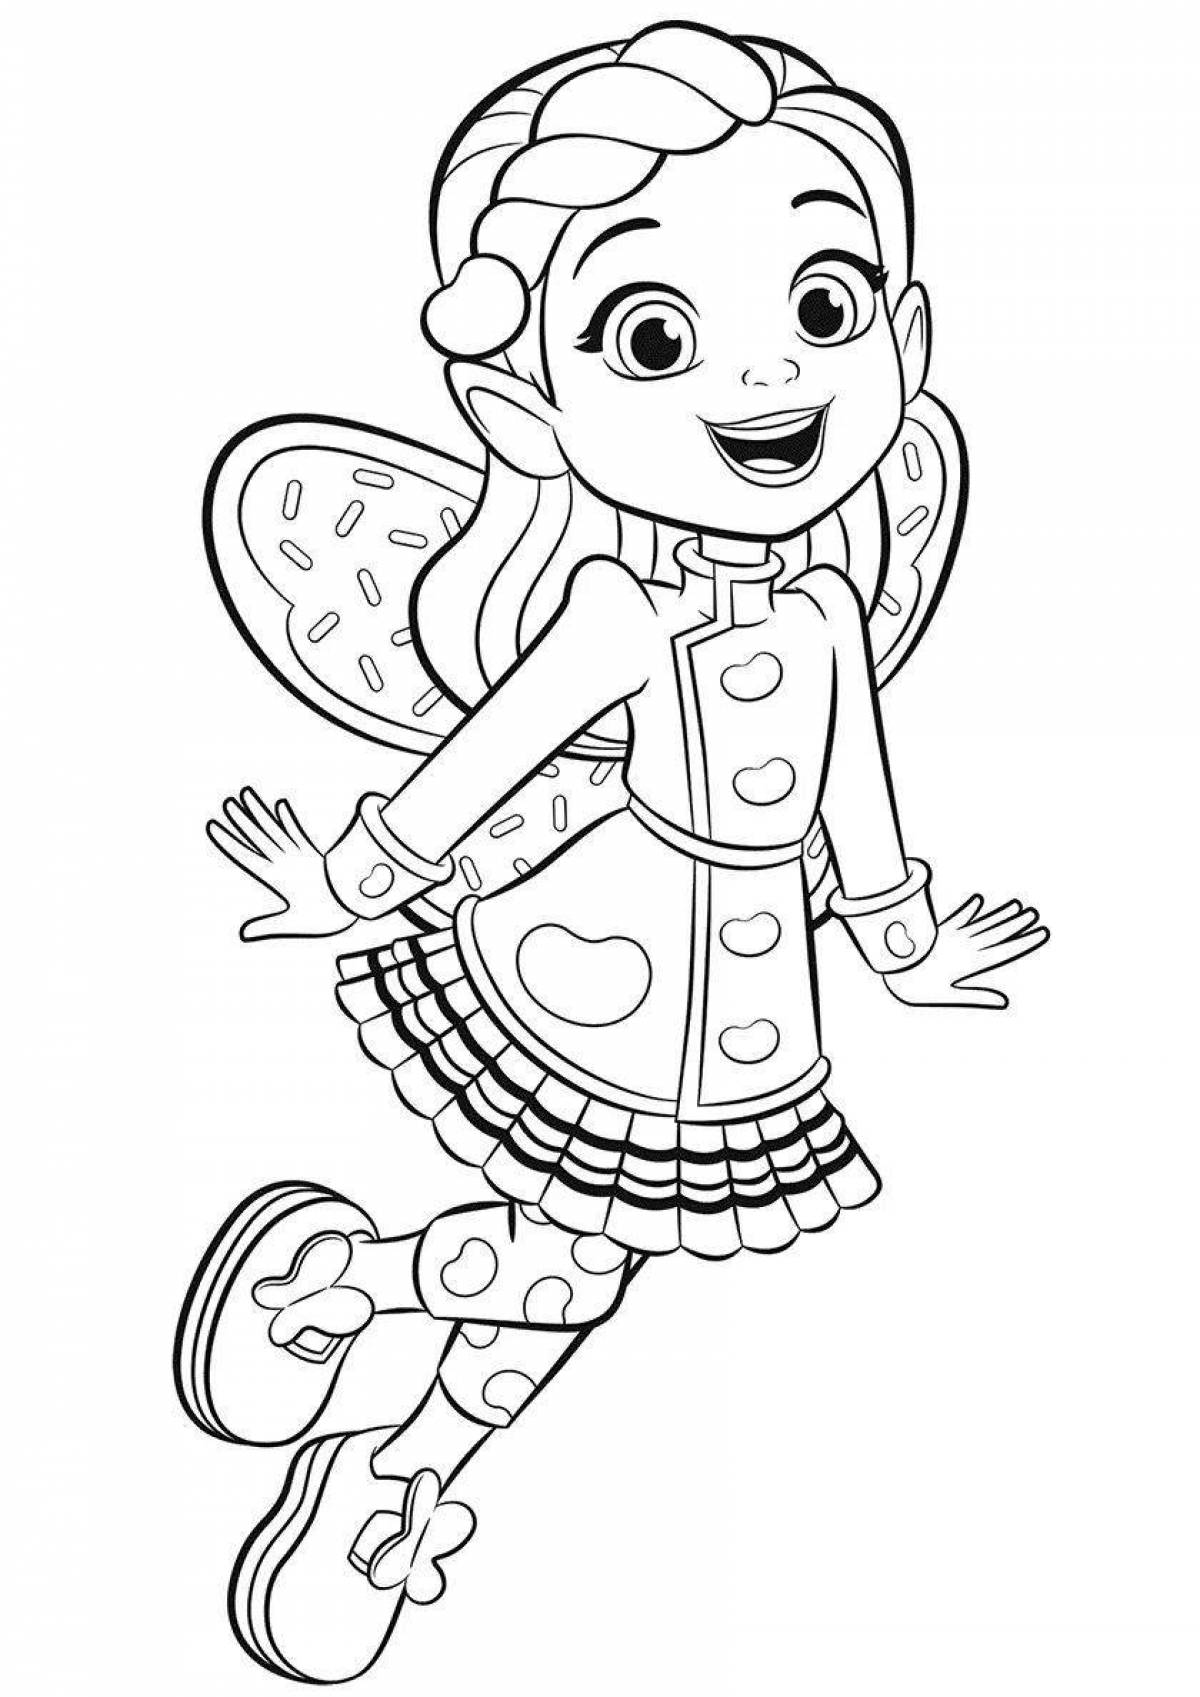 Cute butterbean cafe coloring page